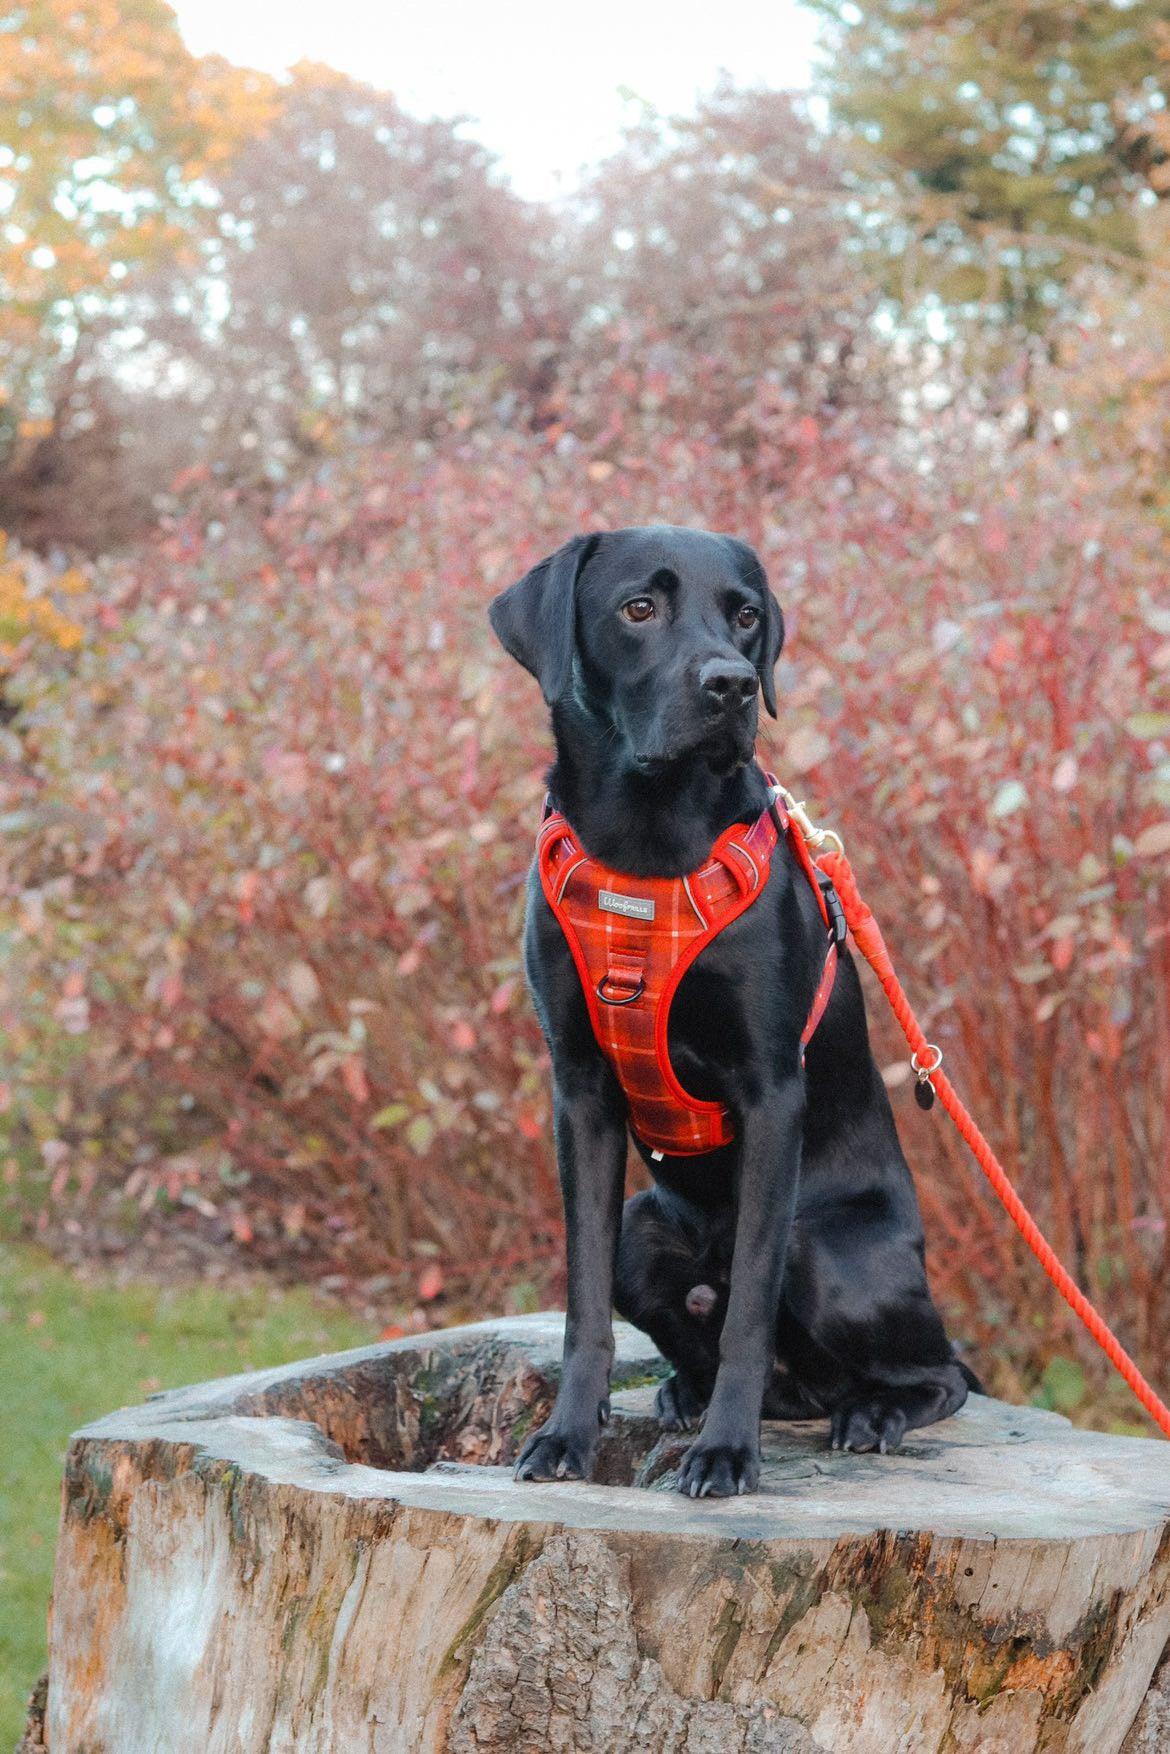 Black labrador looking cute in a Adjustable step in harness